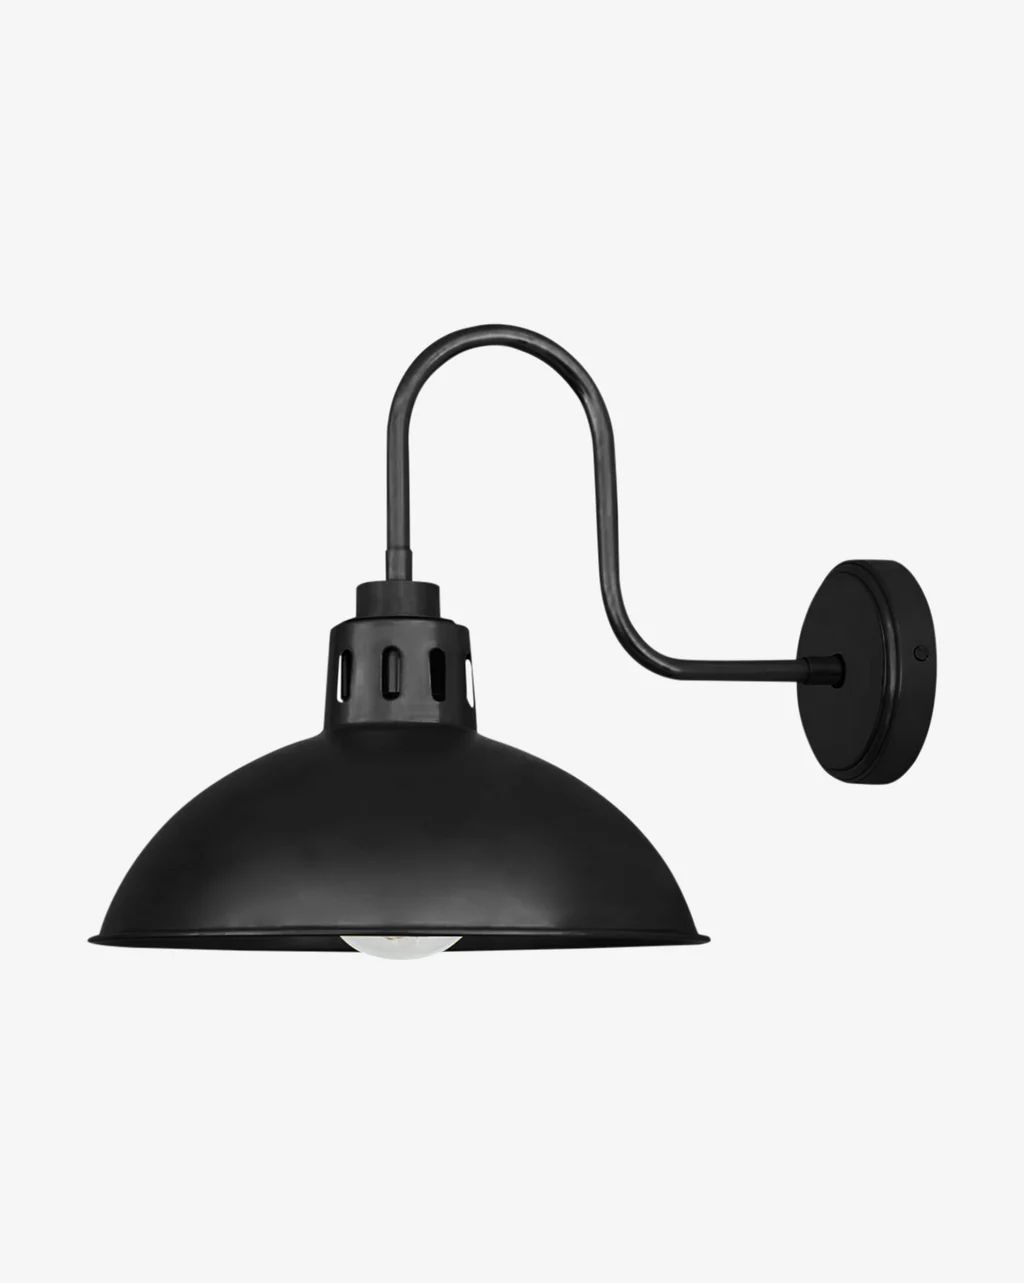 Talise Industrial Swan Neck Wall Light | McGee & Co.